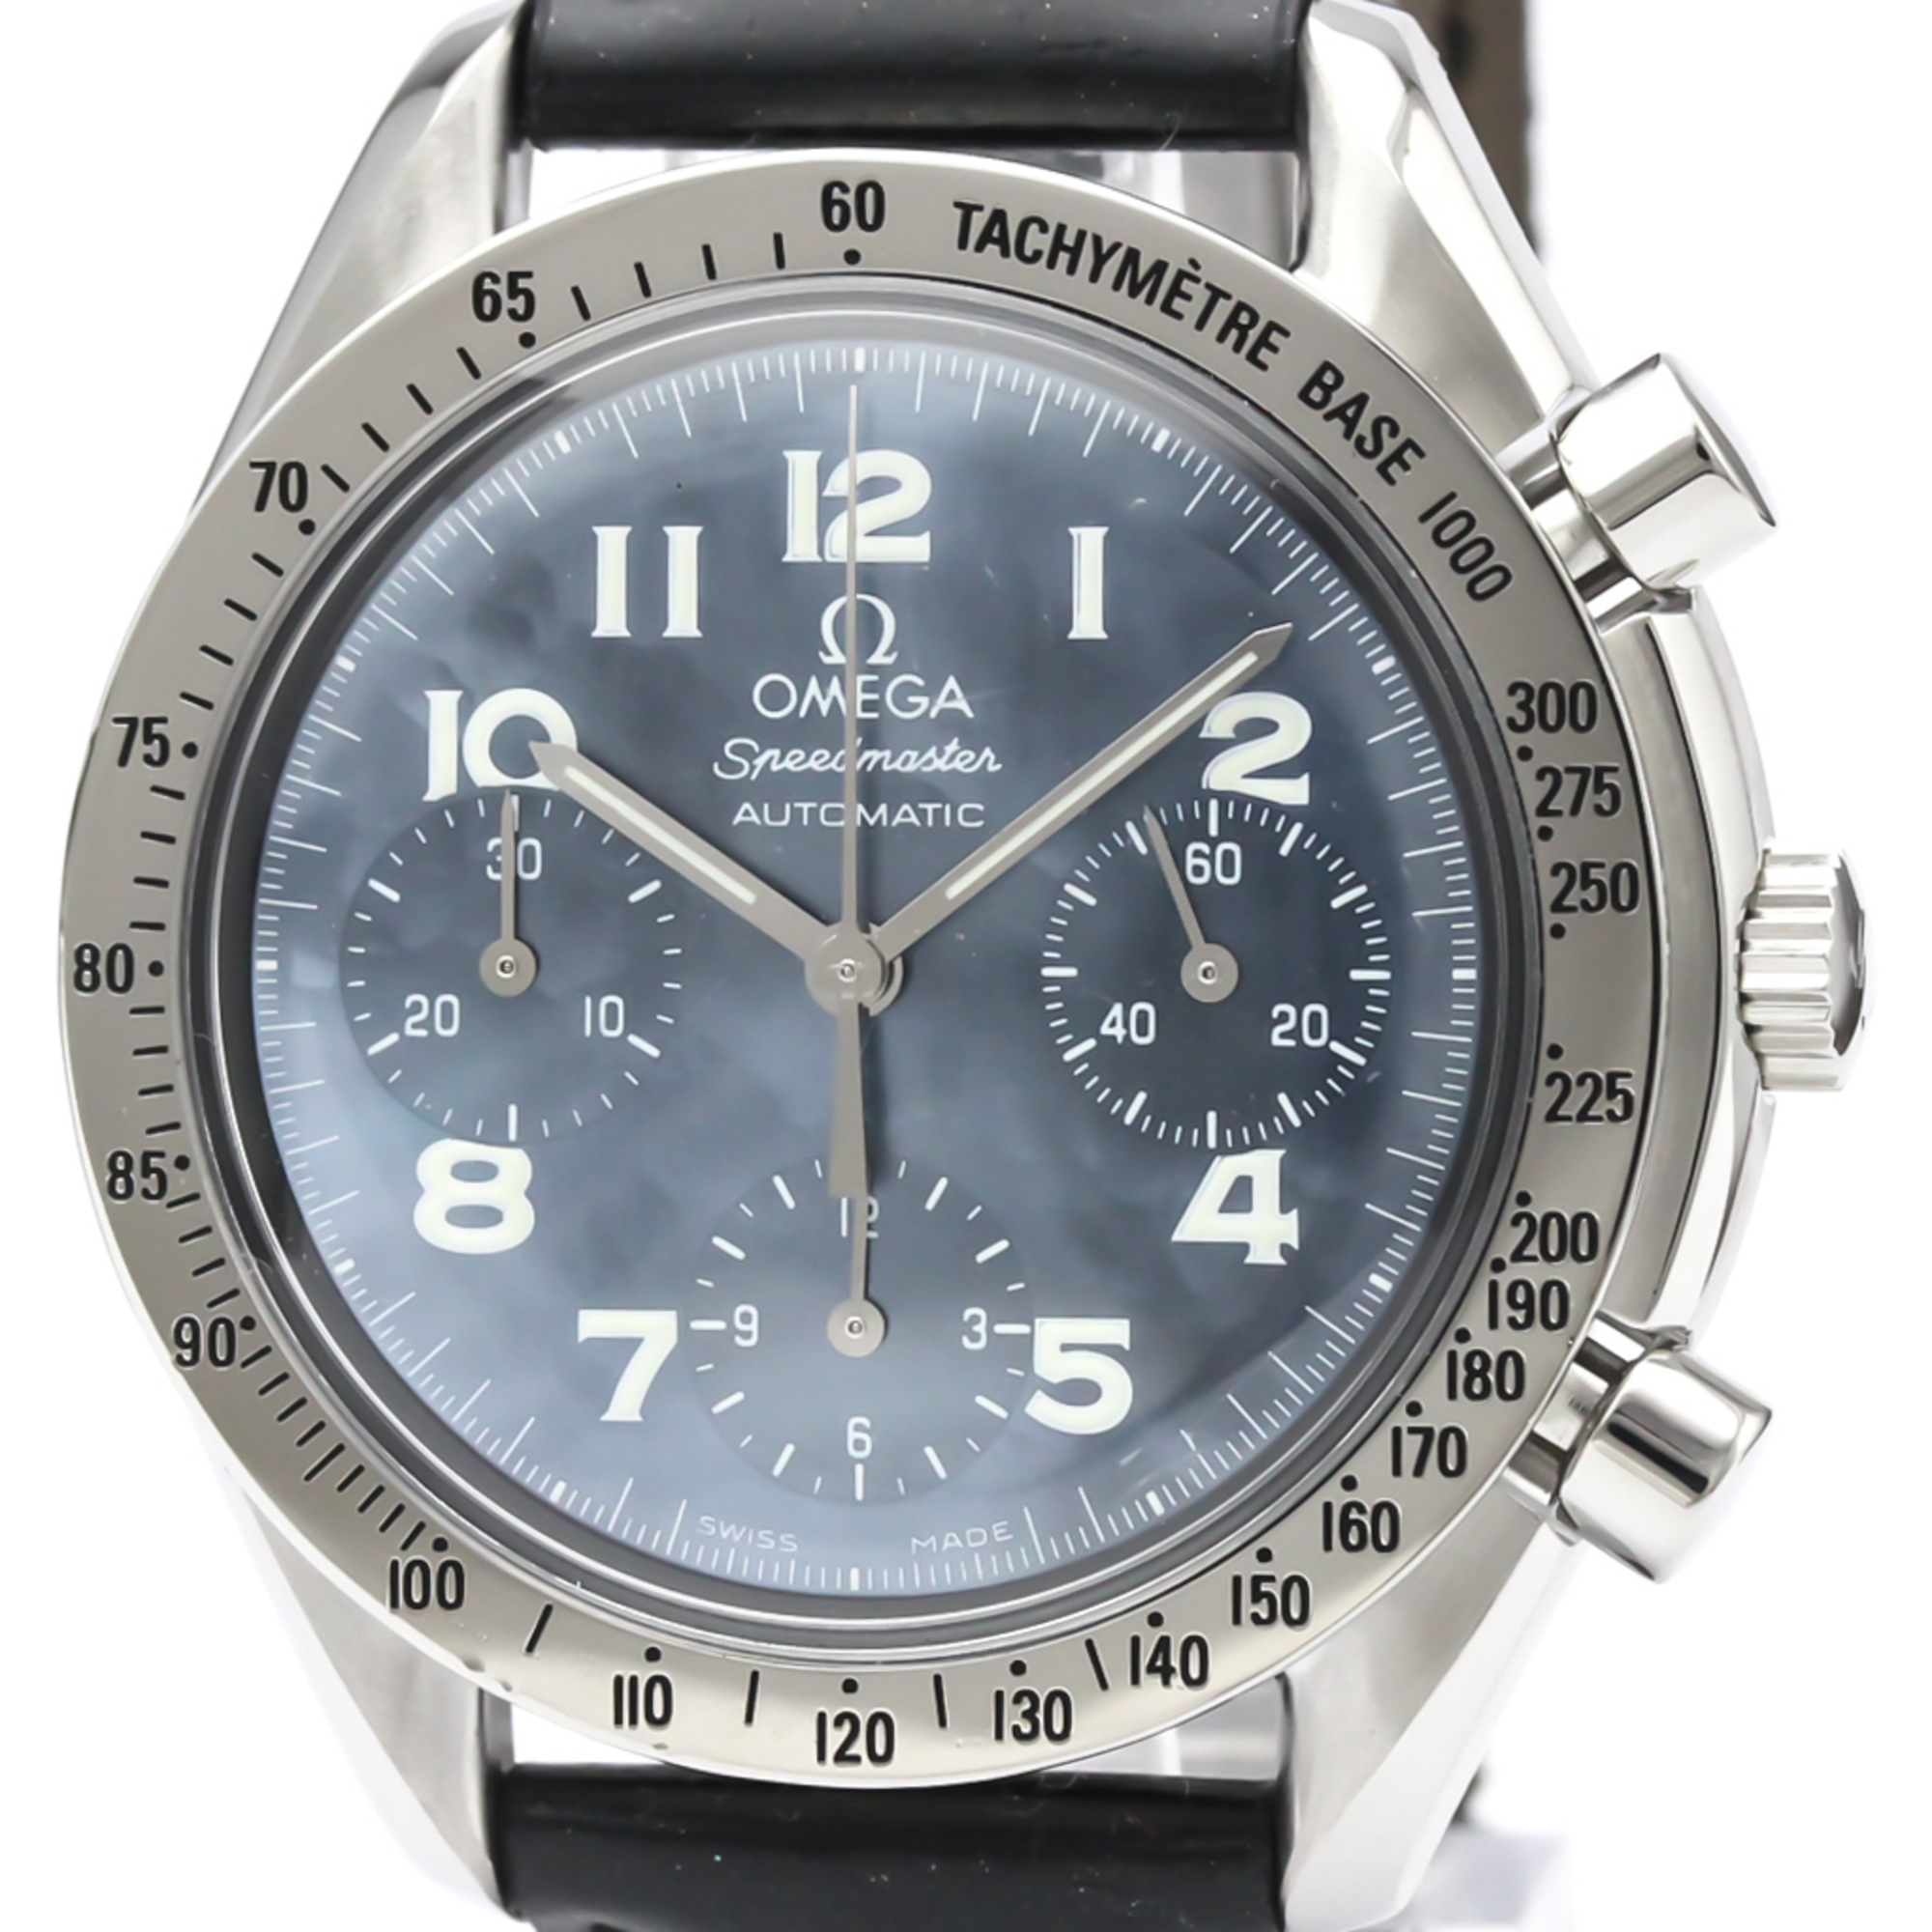 Omega Speedmaster Automatic Stainless Steel Men's Sports Watch 3502.73